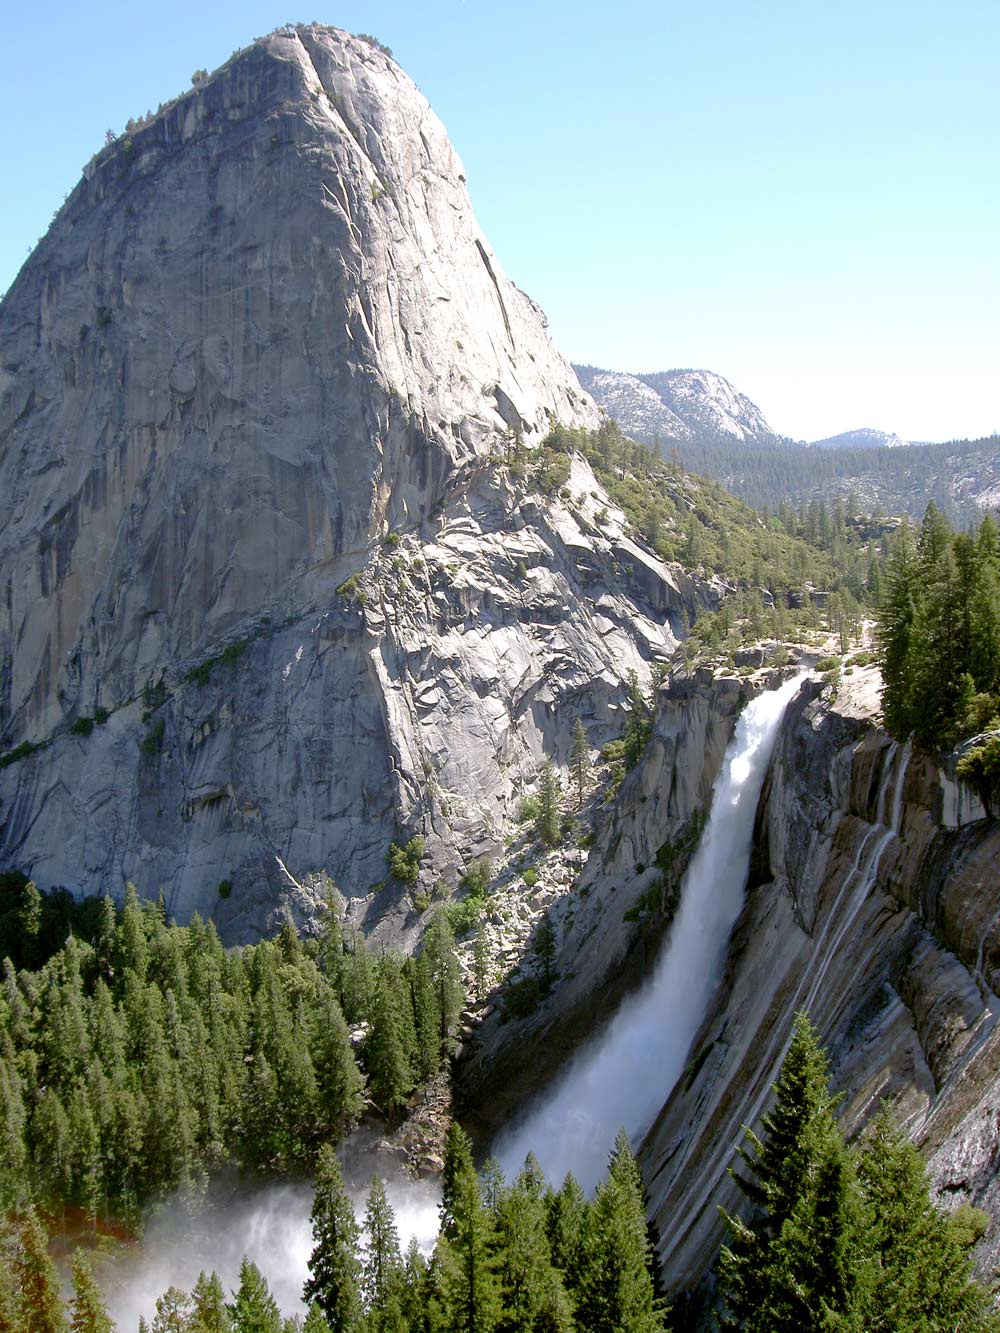 View of Nevada Fall from the John Muir Trail, Yosemite National Park